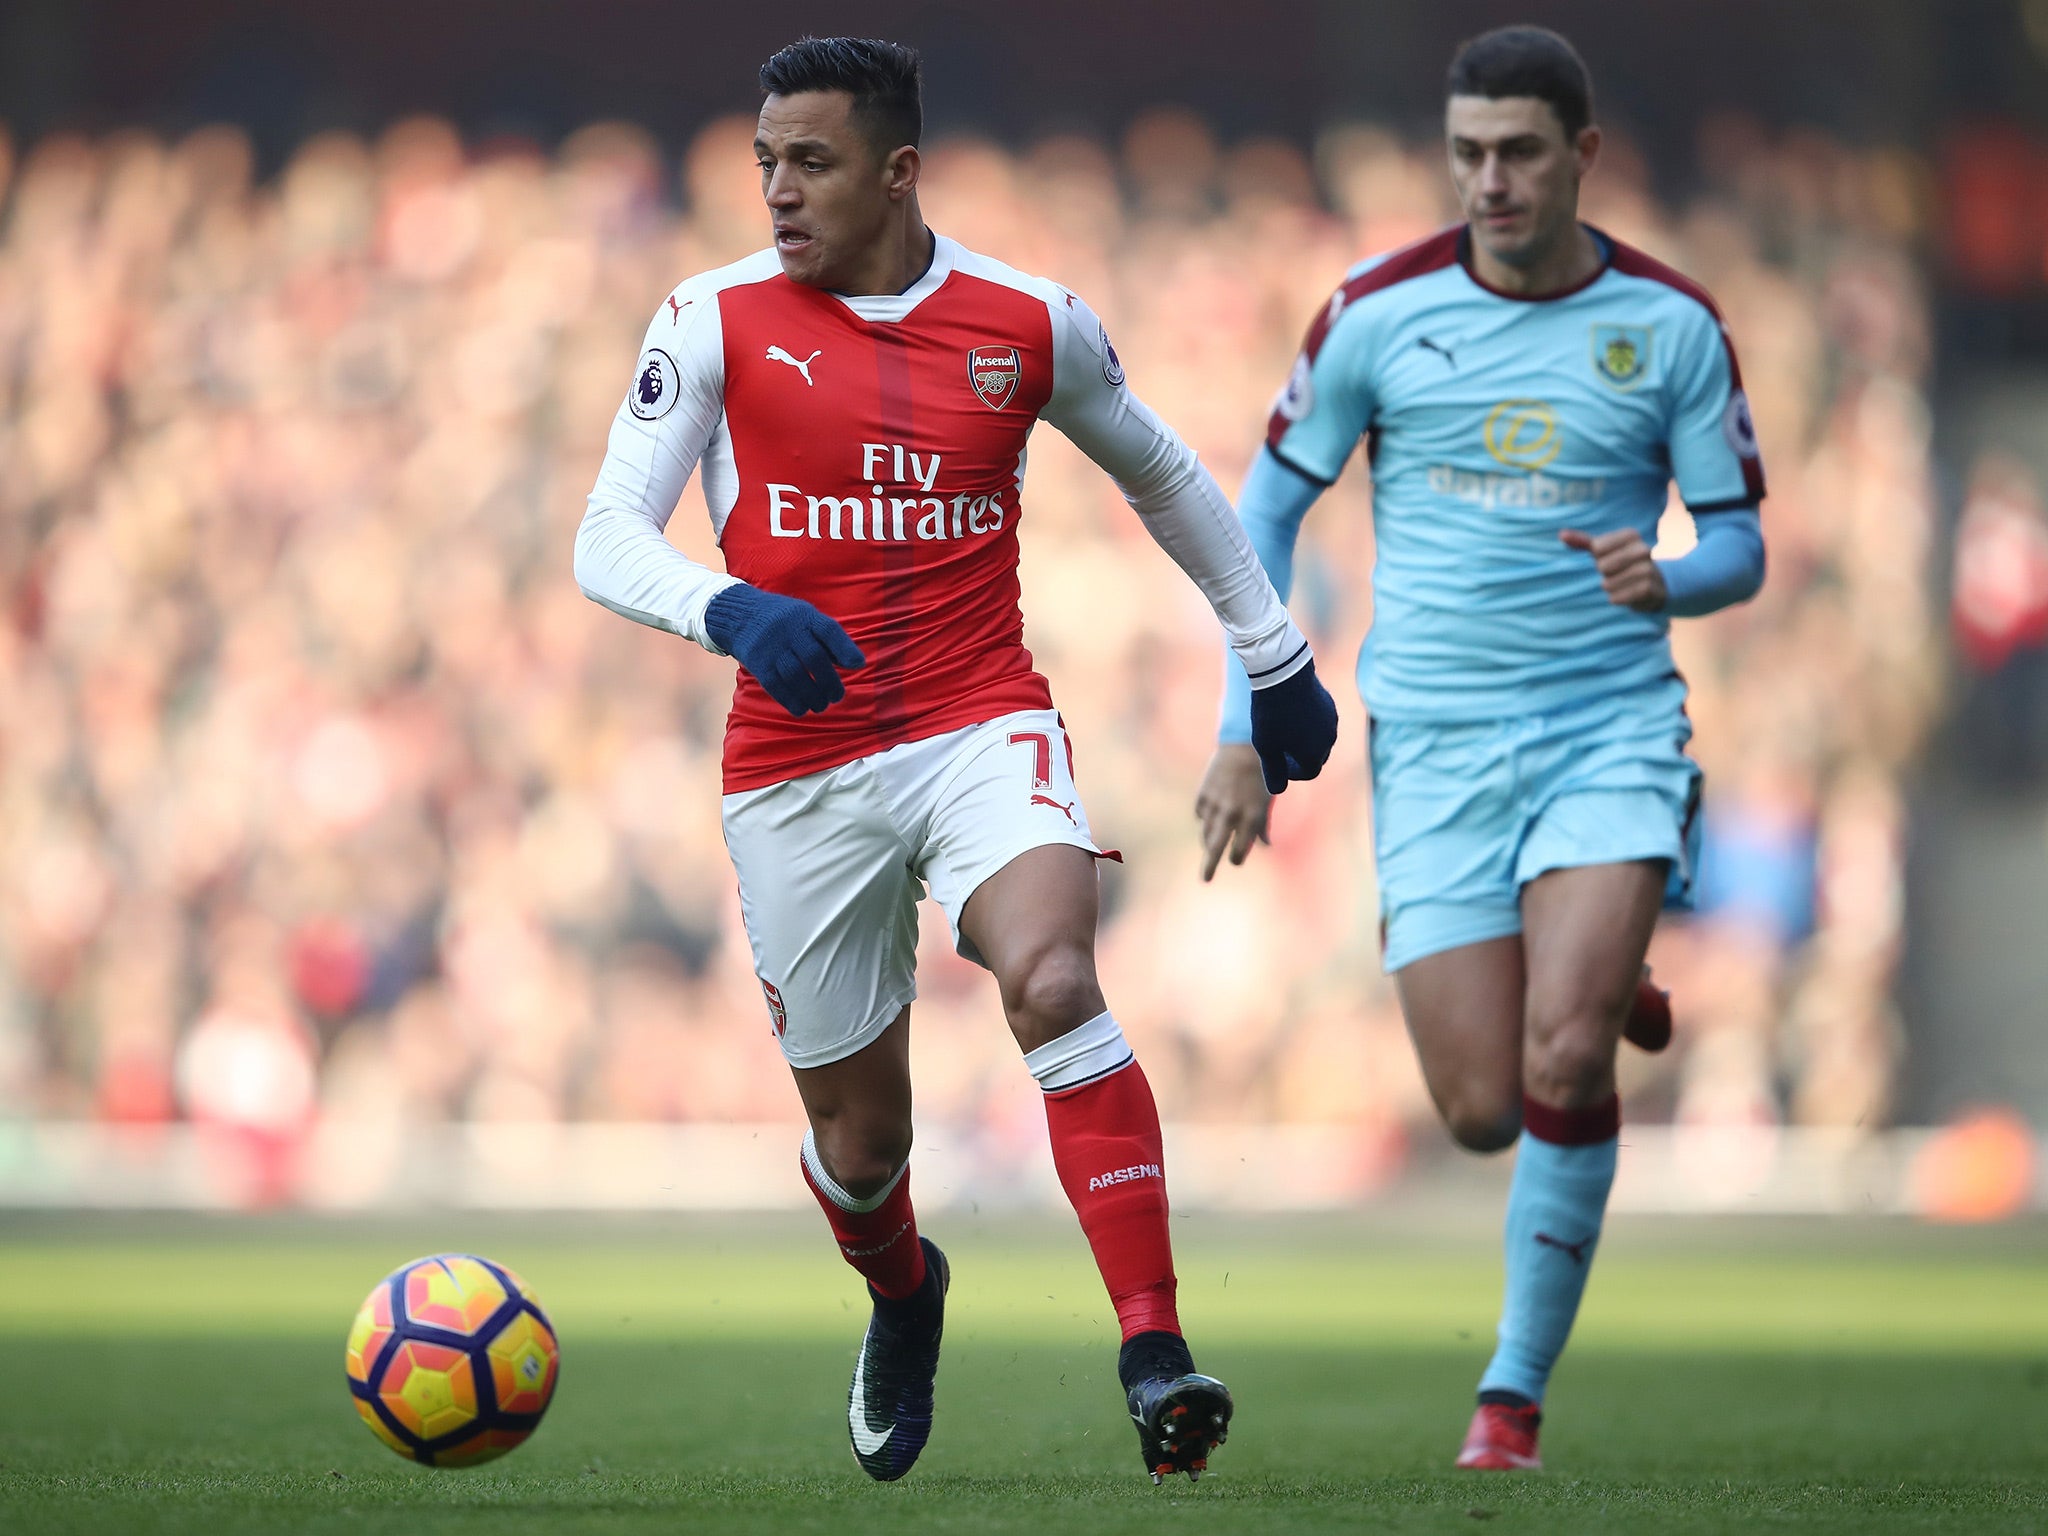 Alexis Sanchez is looking to score for the third consecutive game